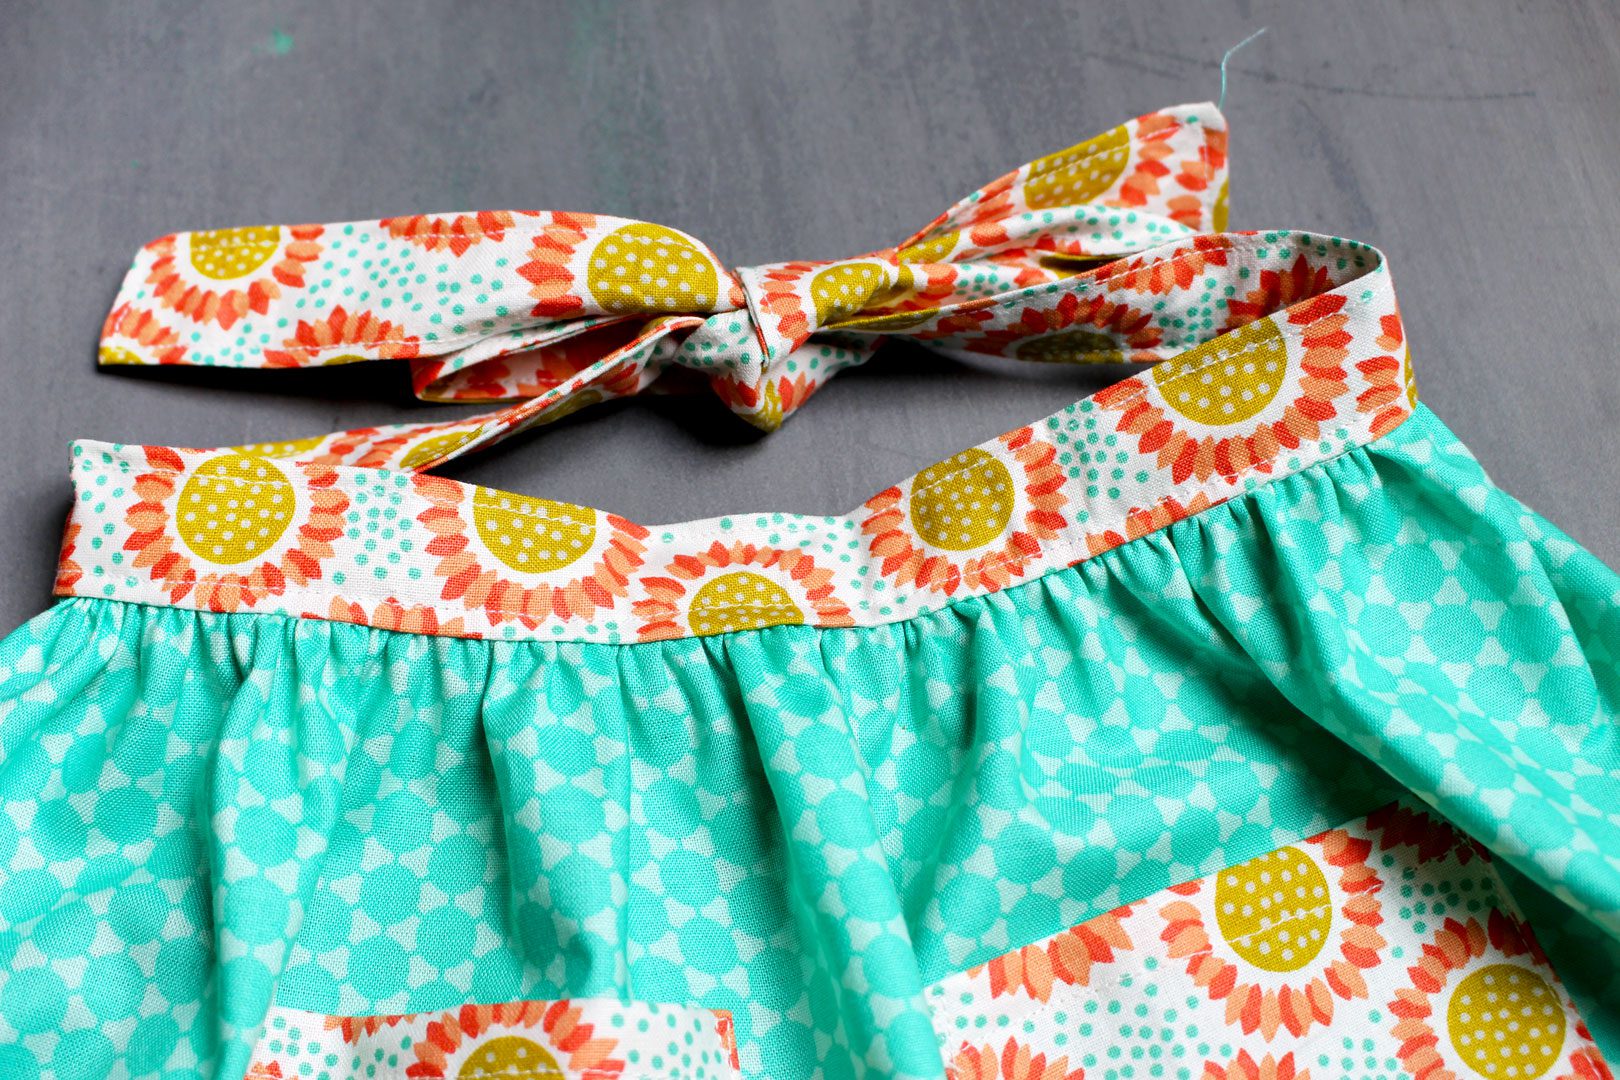 An orange floral waist band for a DIY apron sewed to the top of teal fabric and tied at the back.